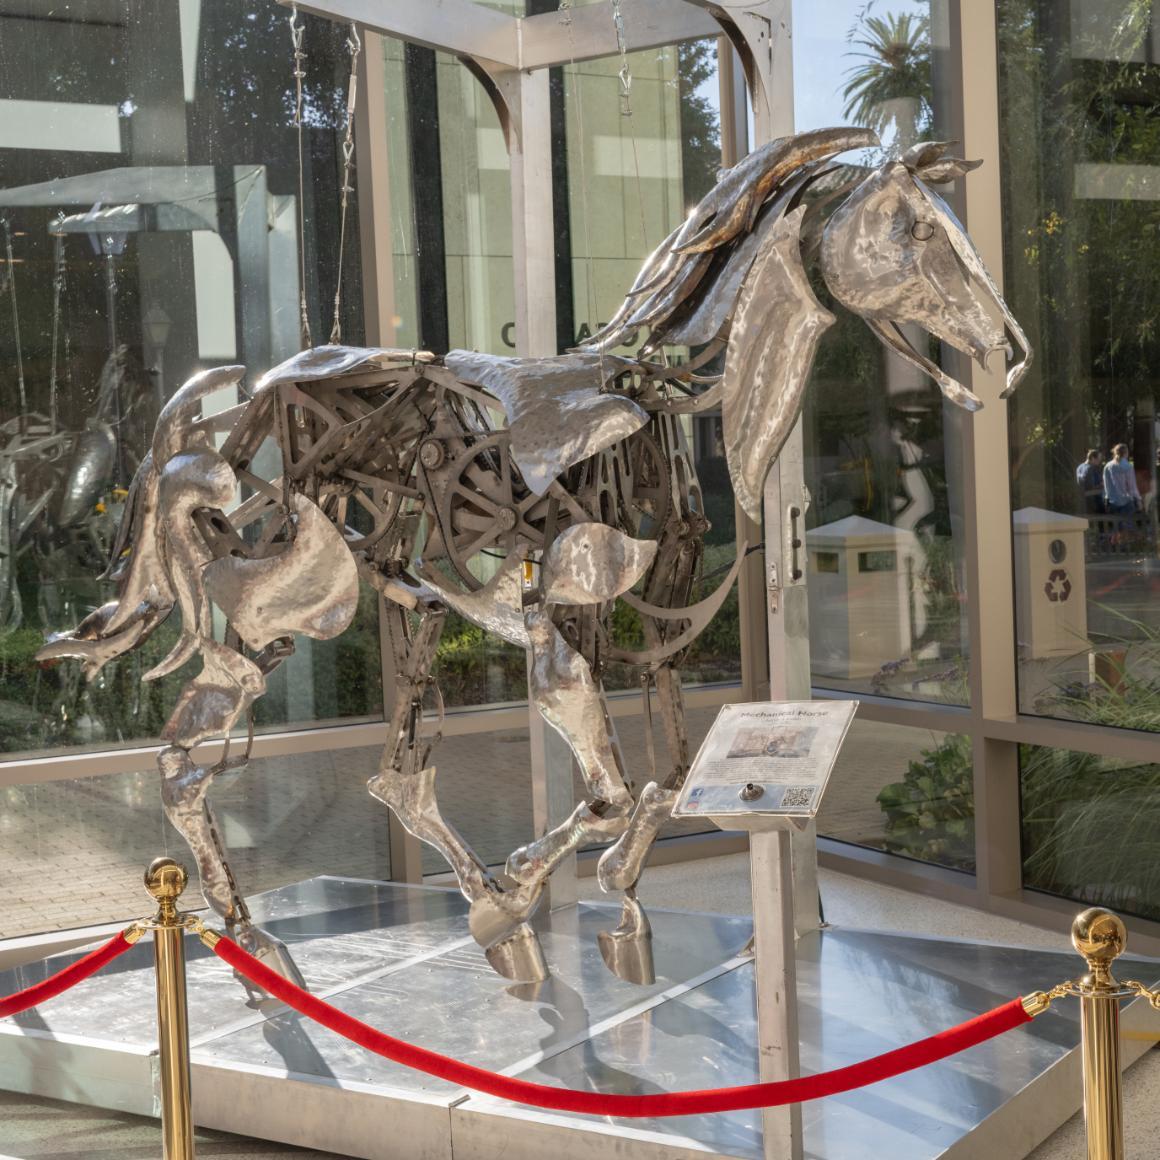 A photo of the Mechanical Horse Displayed in the SCU STEM building